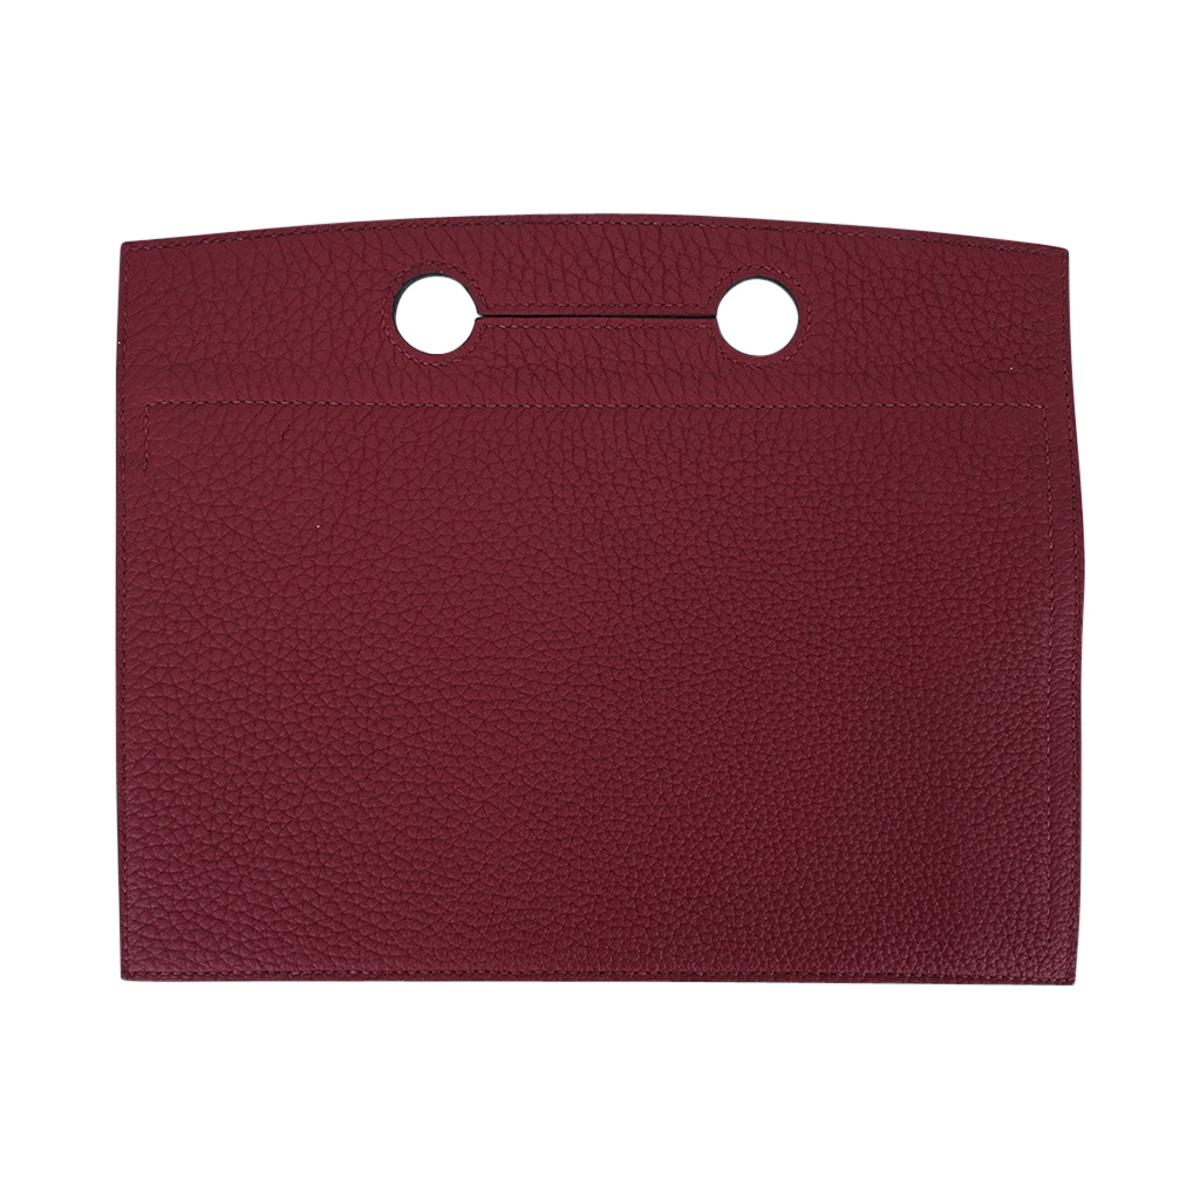 Mightychic offers an Hermes Backpocket 5 Pouch featured in Rouge Grenat.
Beautiful in Togo leather with Palladium hardware.
This flat Backpocket fits easily over the handle and features a partitioned interior.
In a fabulous neutral color!  And fun